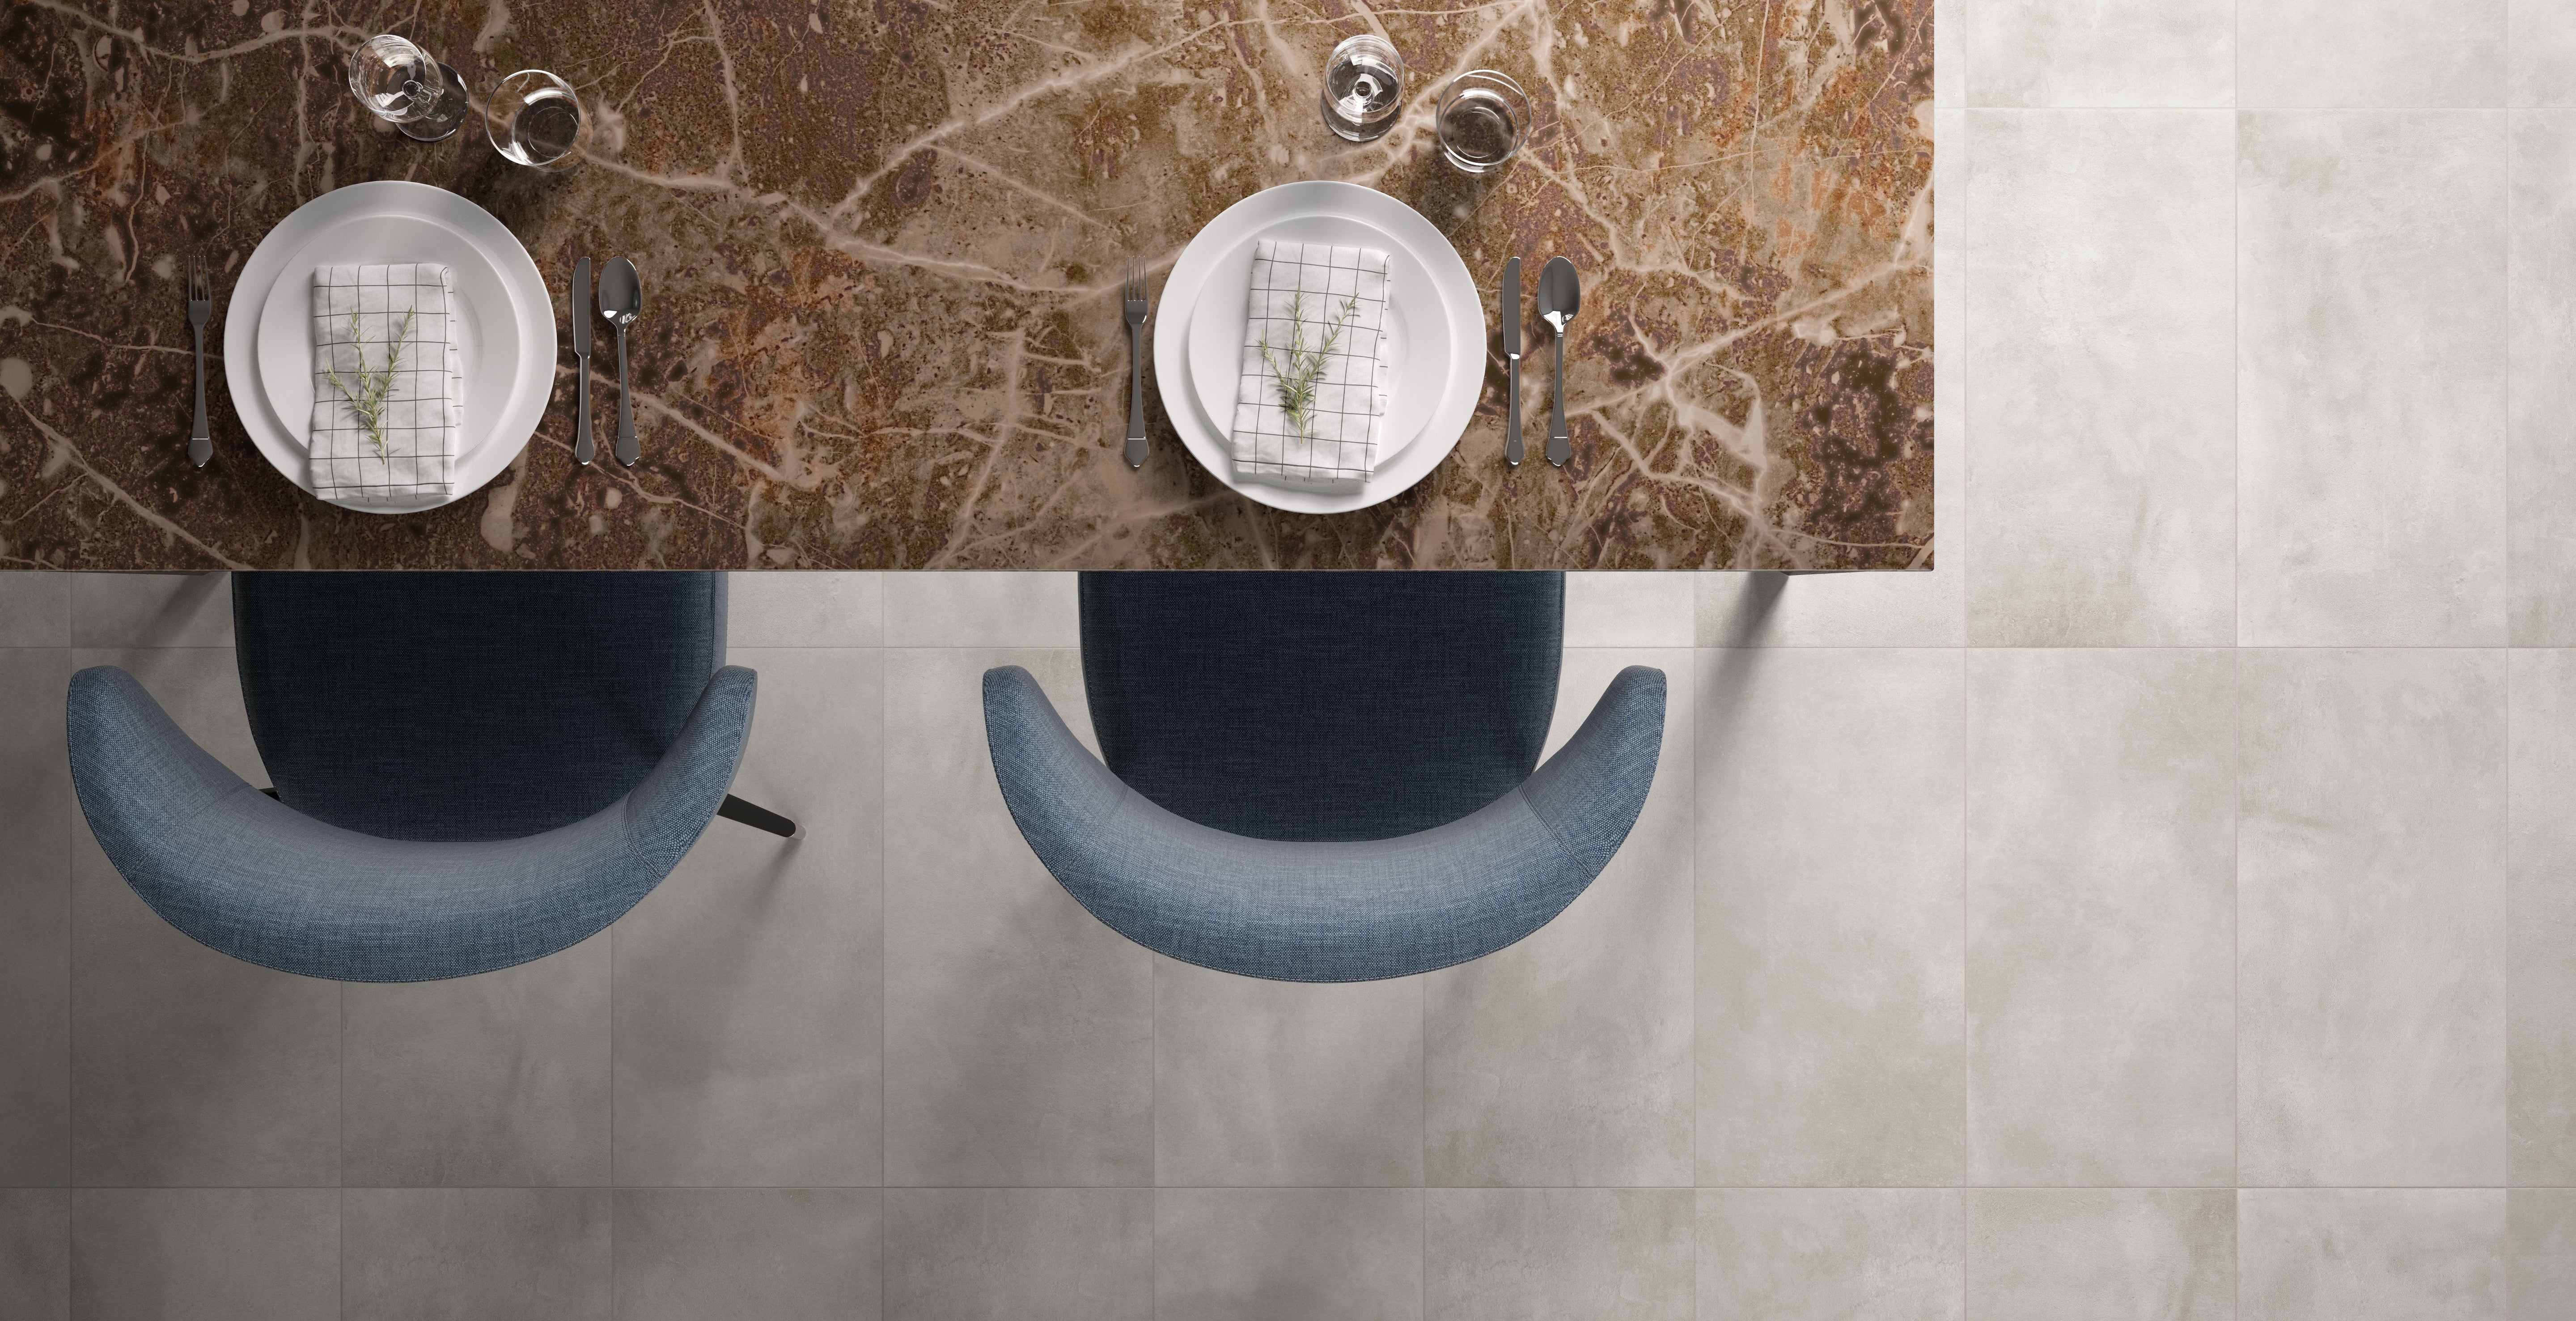 Luxurious New York porcelain tile collection by Surface Group, featuring elegant marble design in a modern bathroom setting with stylish tableware and plush seating.